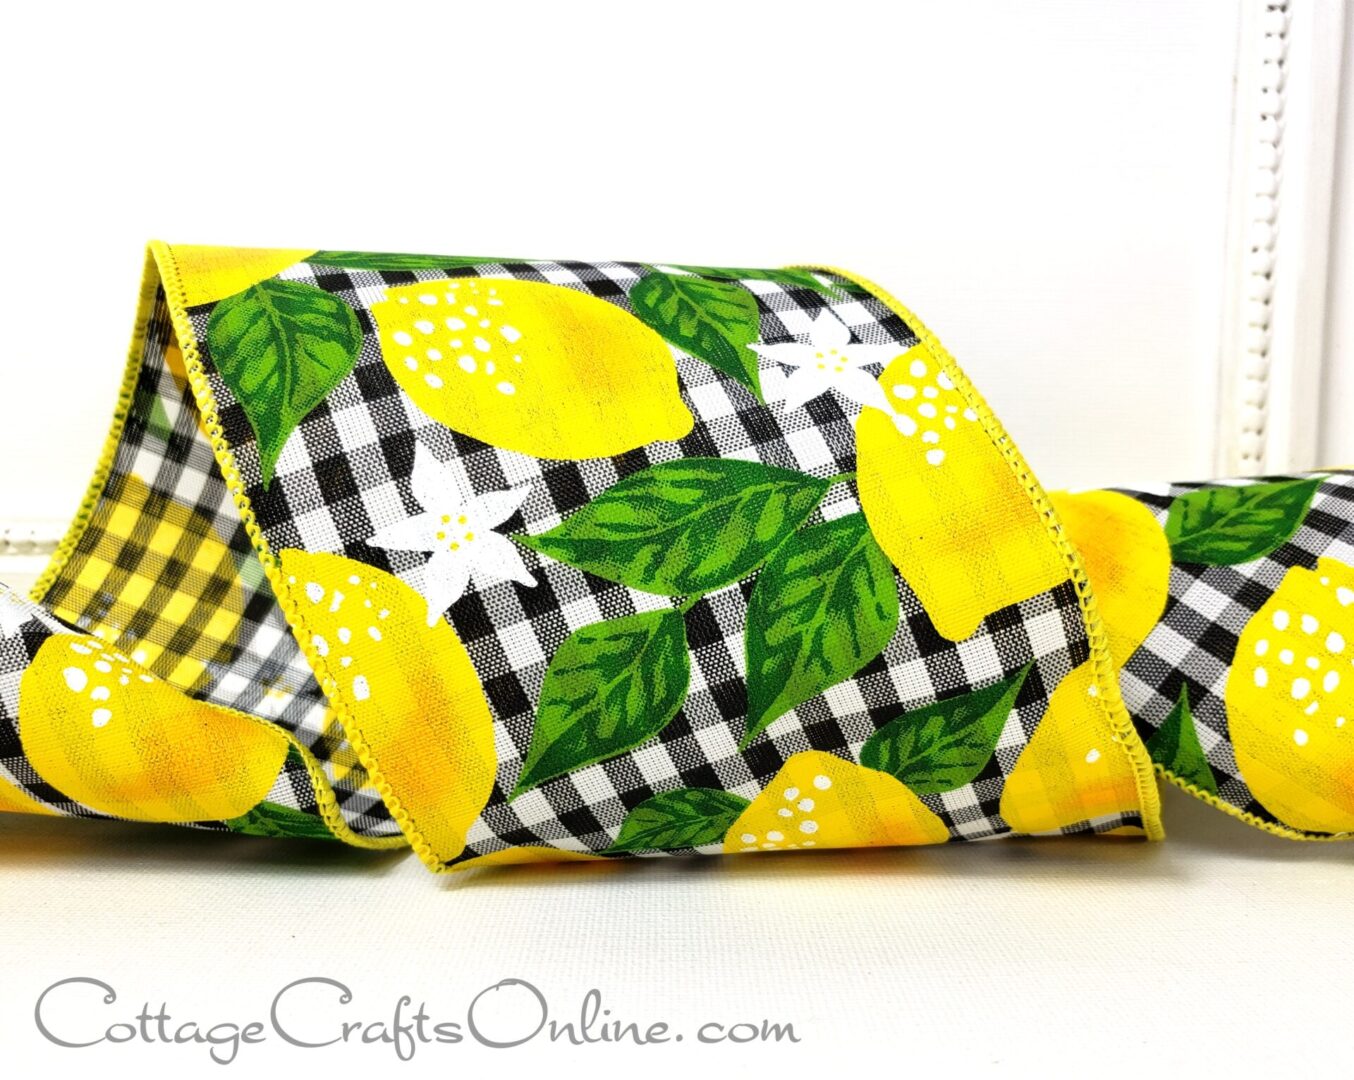 A ribbon with lemons and checkered design